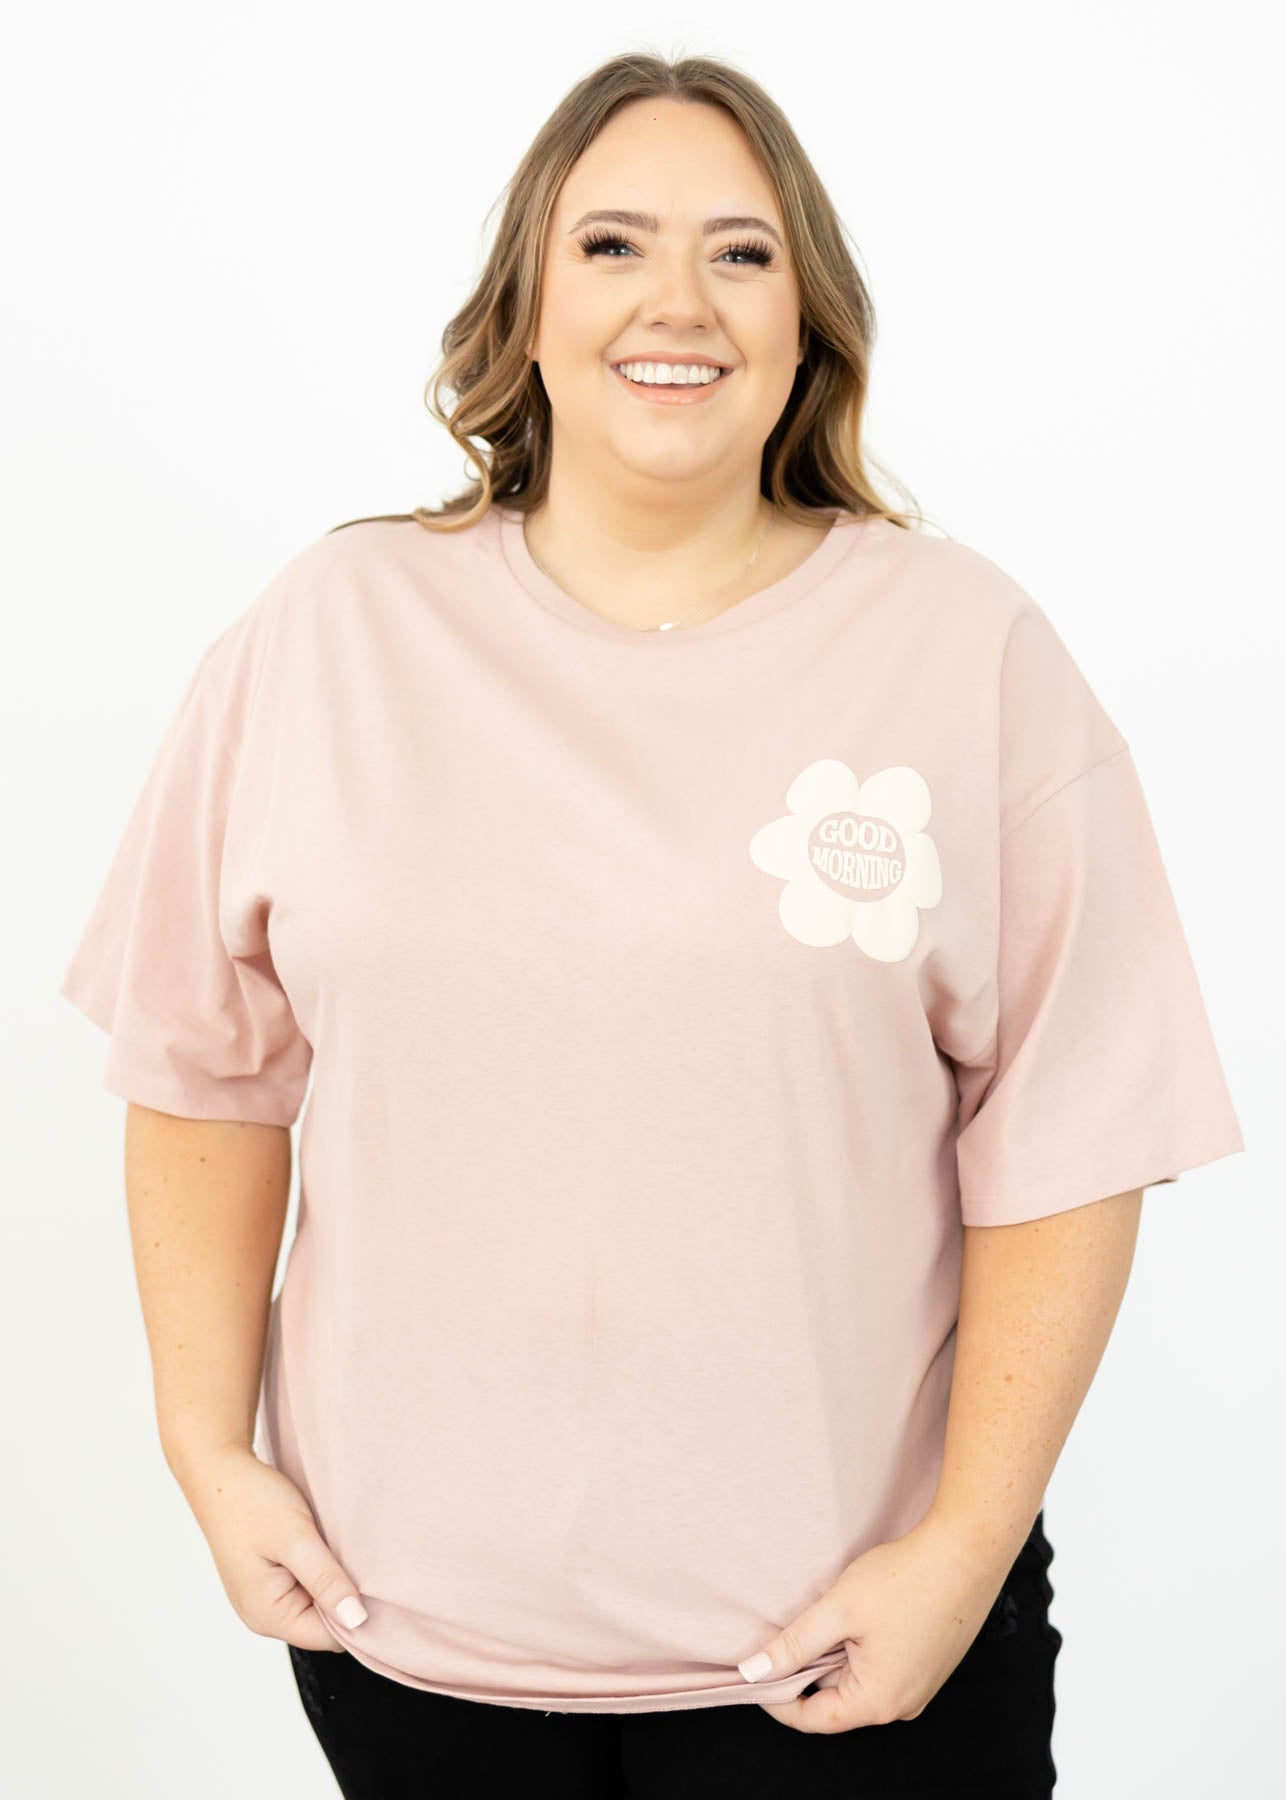 Short sleeve plus size pink top